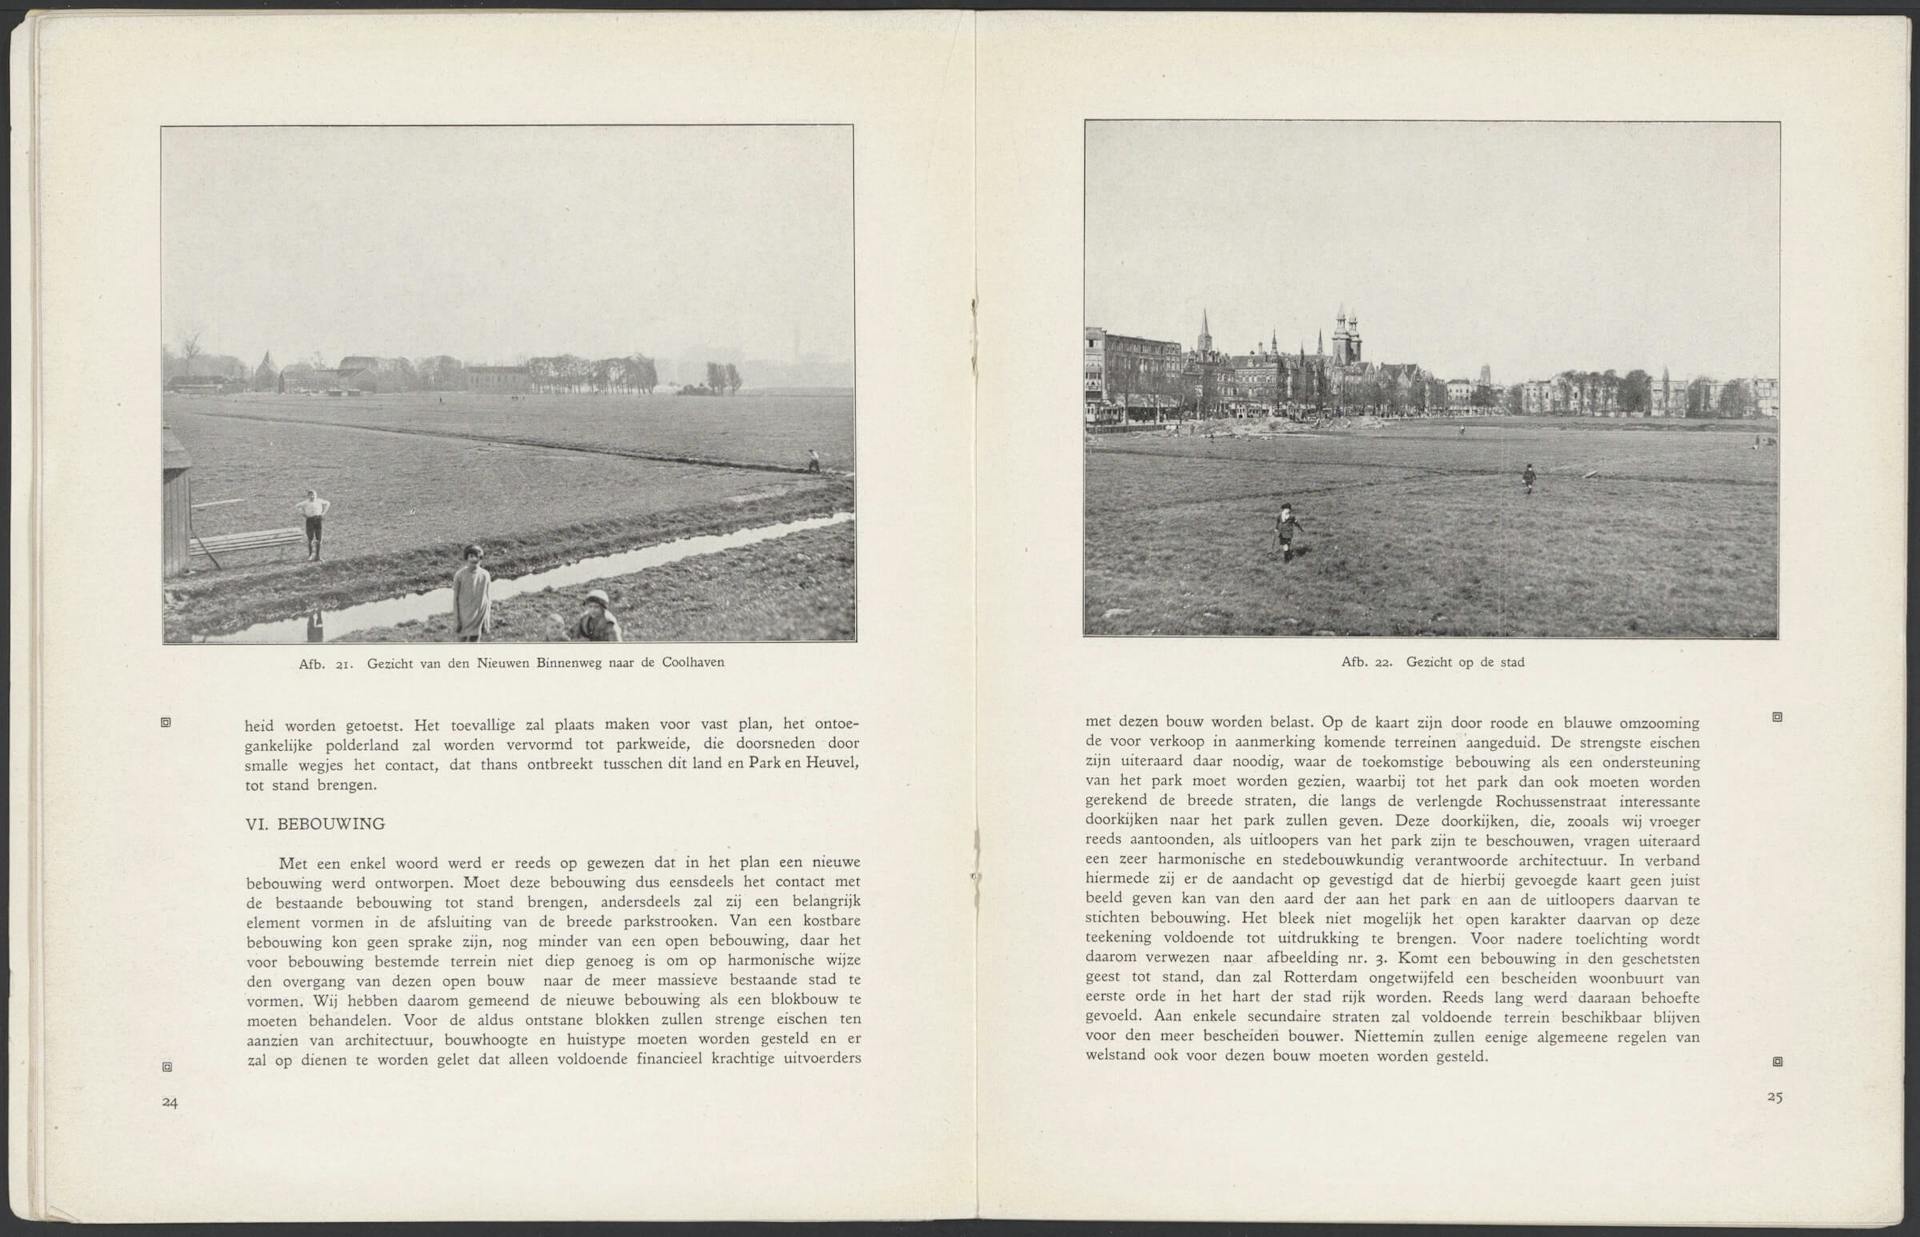 Witteveen was fascinated by the Land van Hoboken’s vast openness and its view of the city. W. G. Witteveen, The Land van Hoboken Expansion Plan, Rotterdam, 1927, p. 24-25. Collection Het Nieuwe Instituut, NIROV library, 49.183 